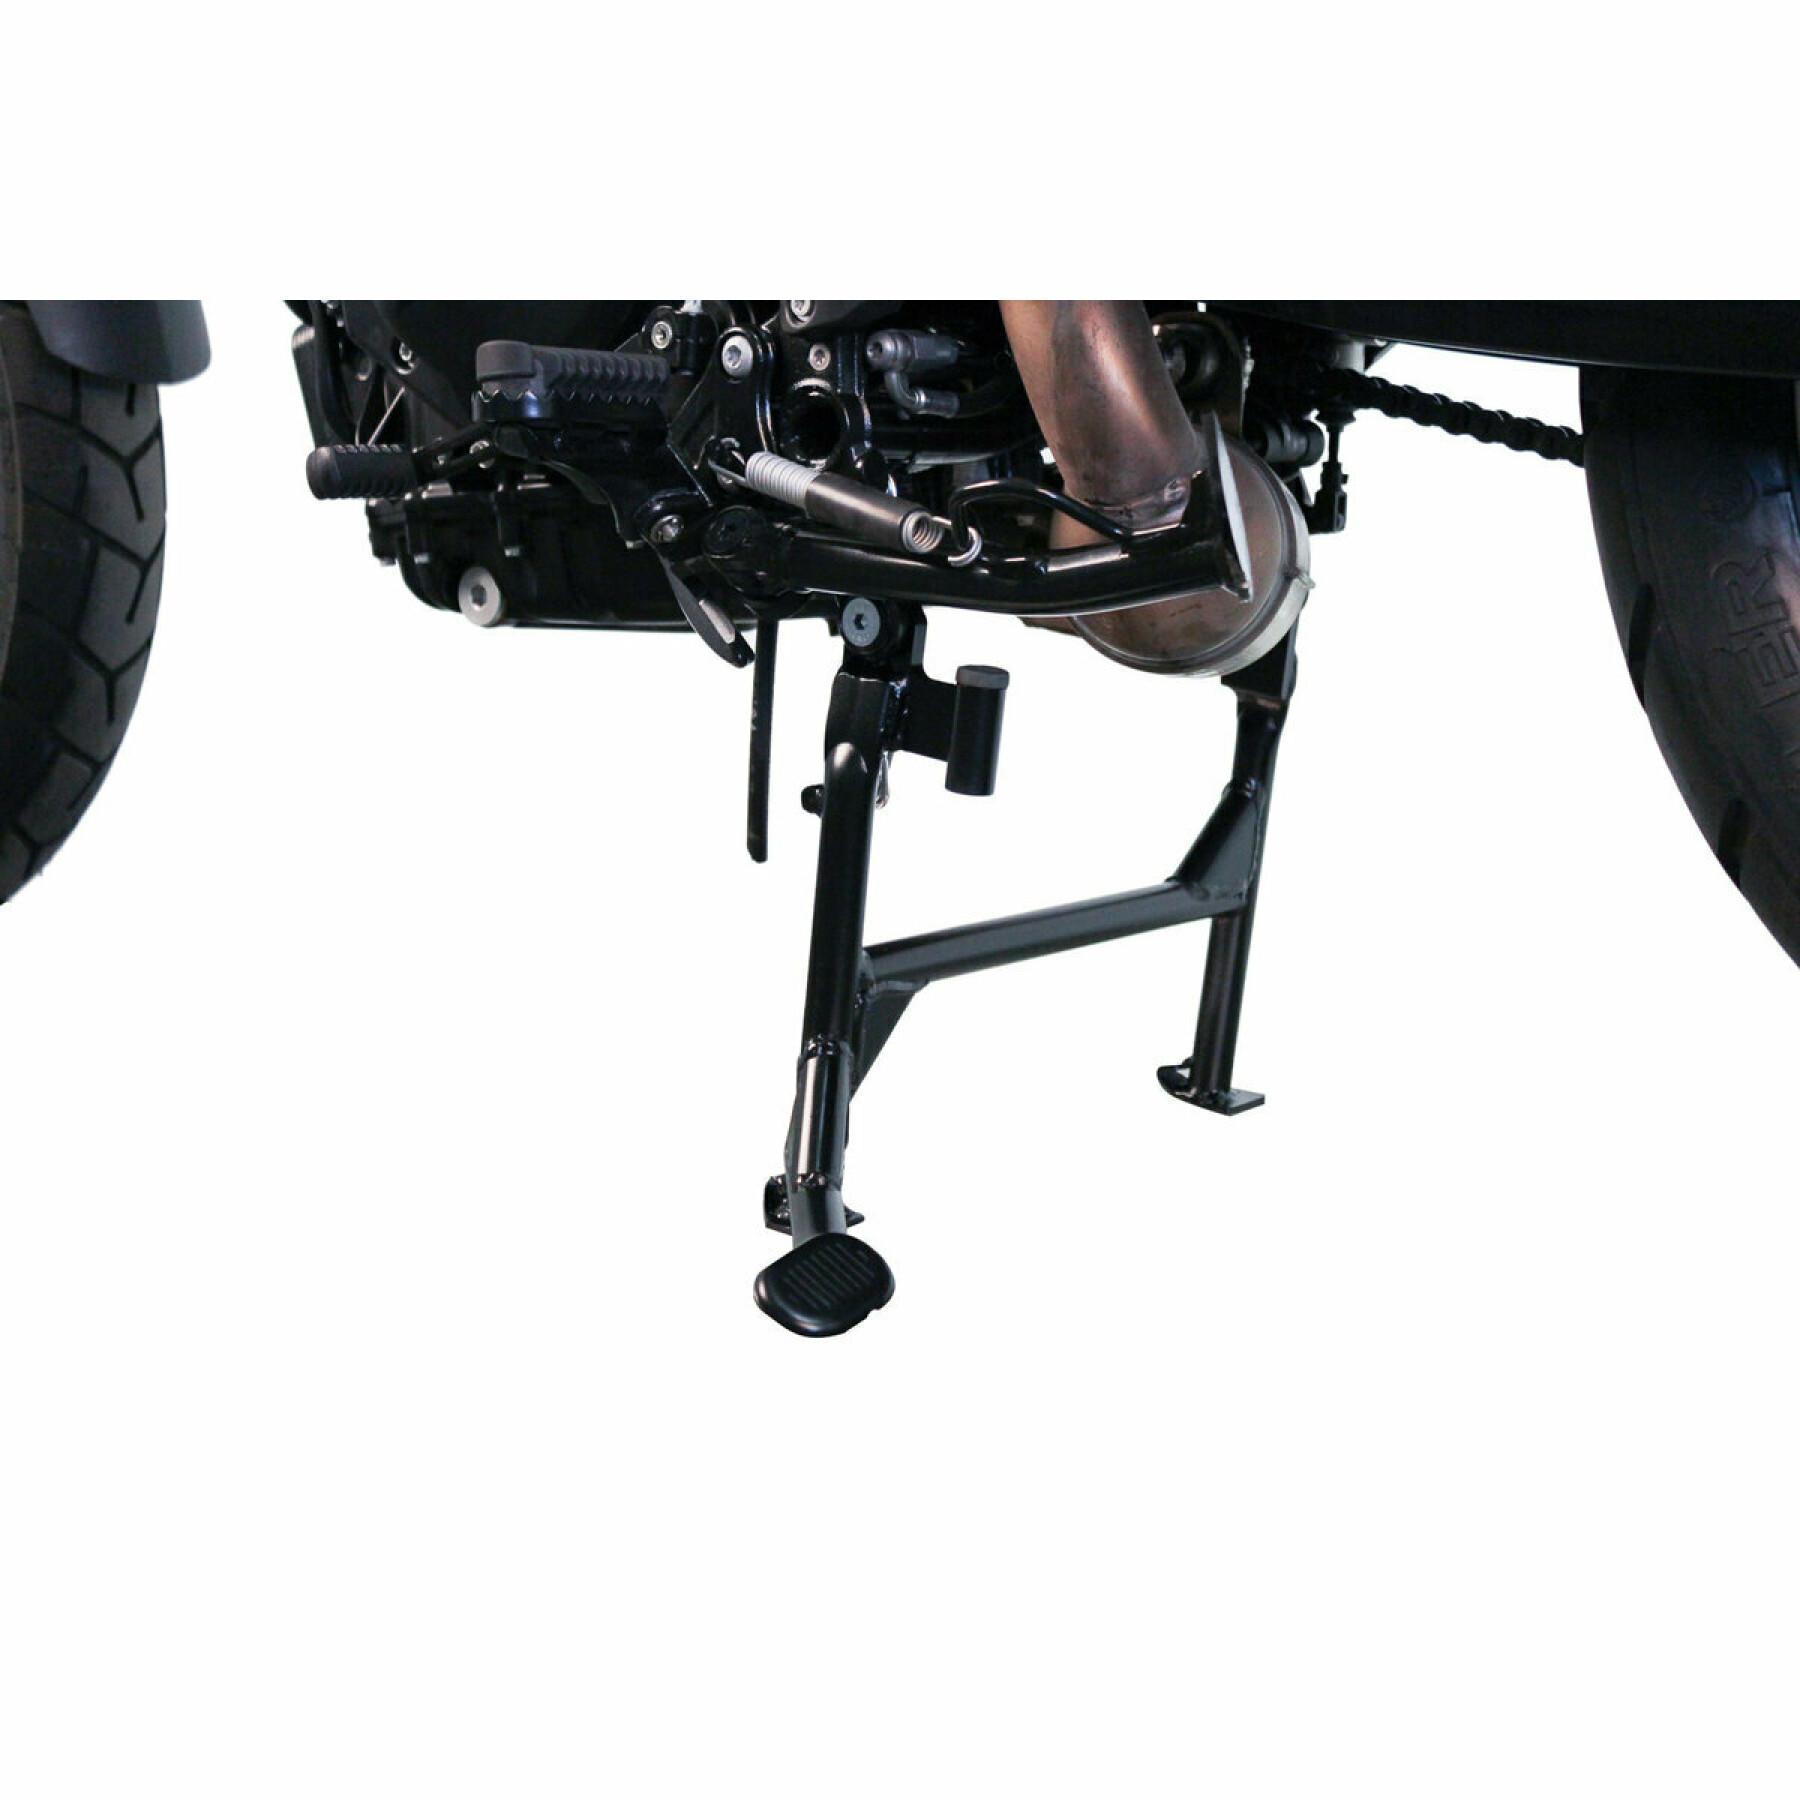 Motorcycle center stand with lowering kit SW-Motech BMW F650/700GS